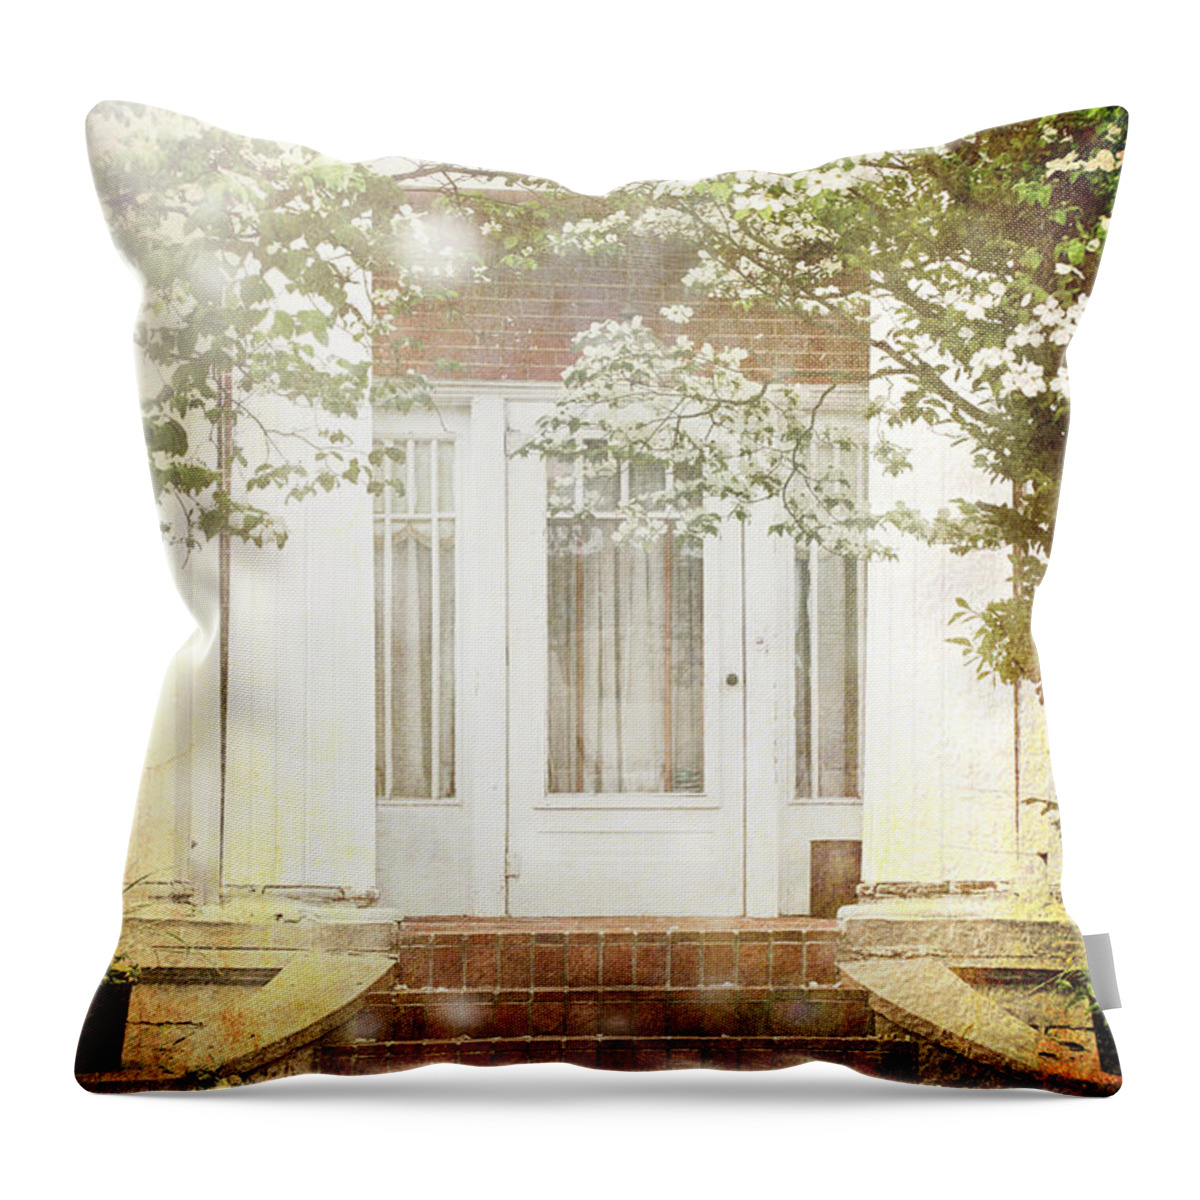 Beautiful Throw Pillow featuring the photograph Southern Spring by Stephanie Frey